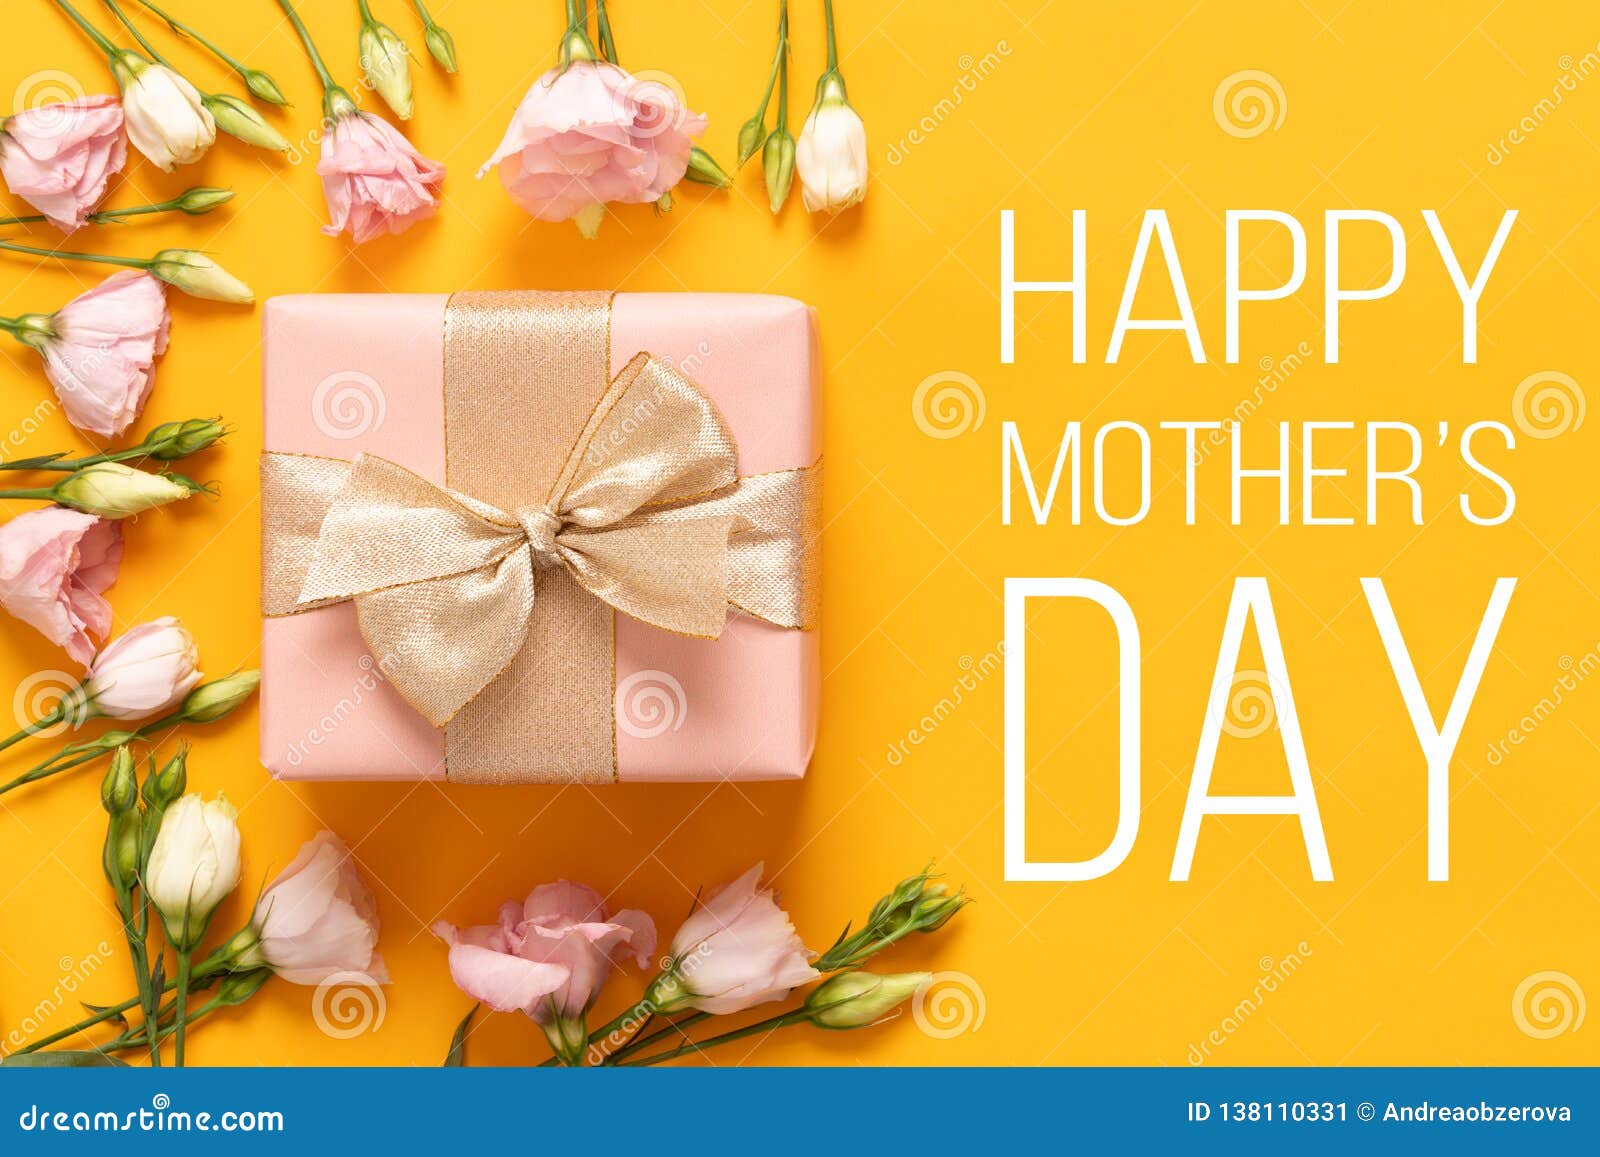 happy mother`s day background. bright yellow and pastel pink colored mother day background. flat lay greeting card with gift box.